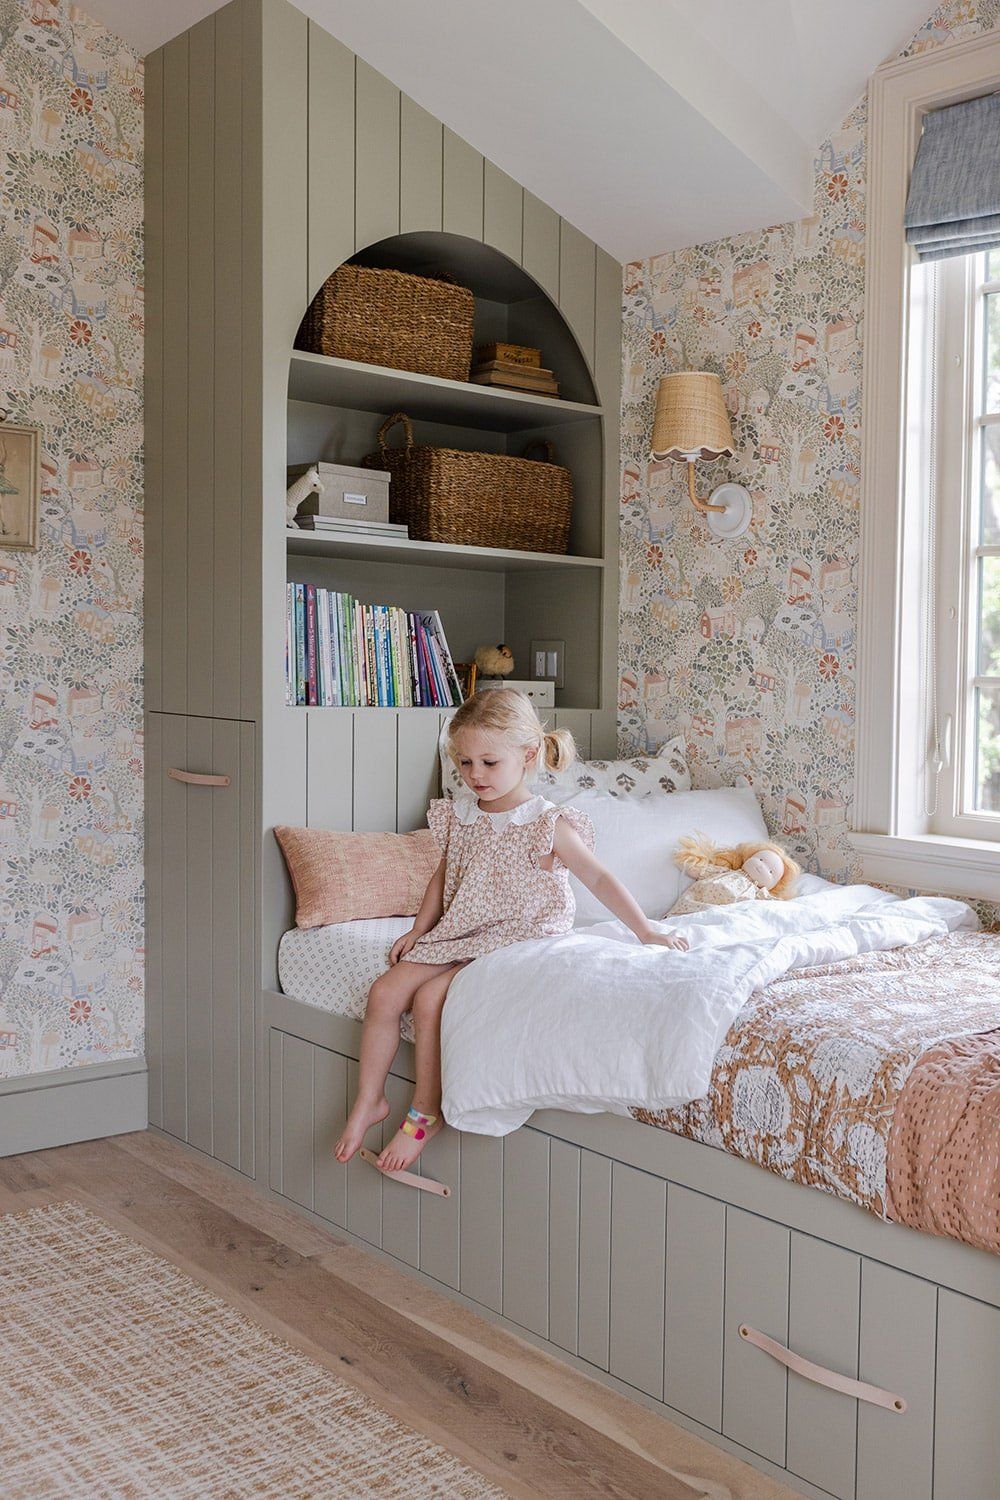 Make your kids bedroom perfect by
following children bedroom ideas